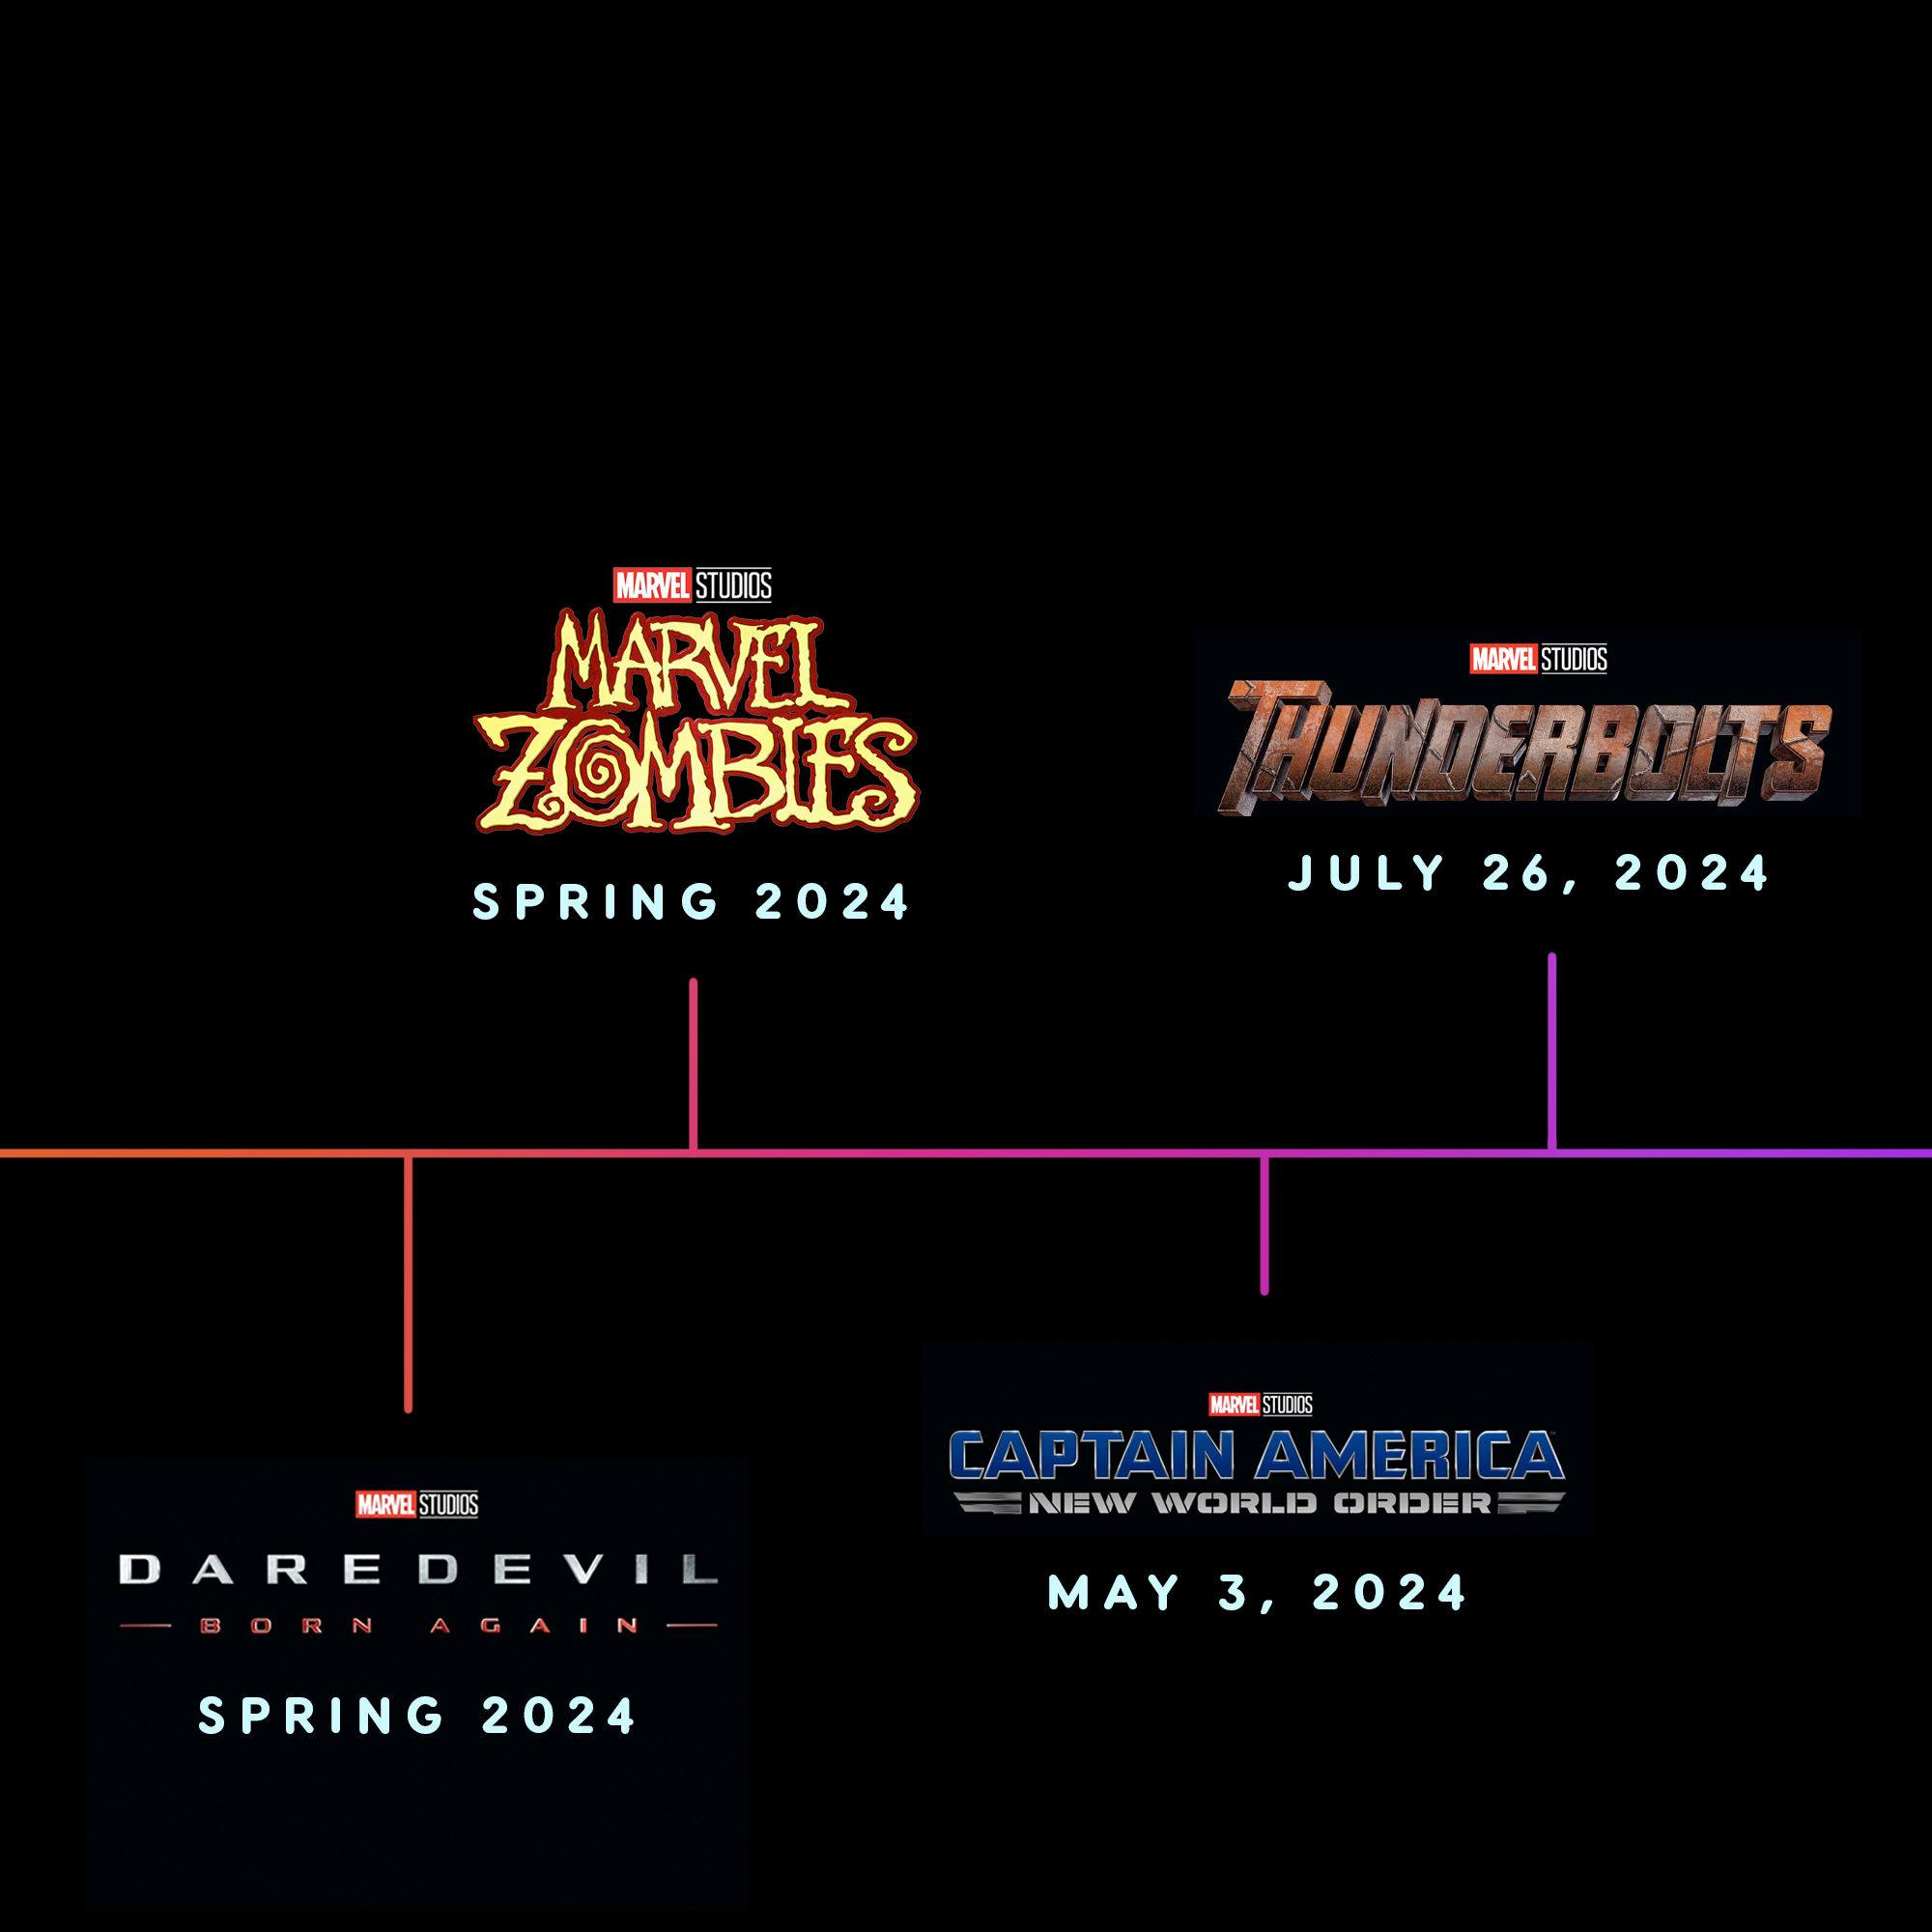 Daredevil: Born Again - Spring 2024 Marvel Zombies - Spring 2024 Captain America: New World Order - May 3, 2024 Thunderbolts - July 26, 2024